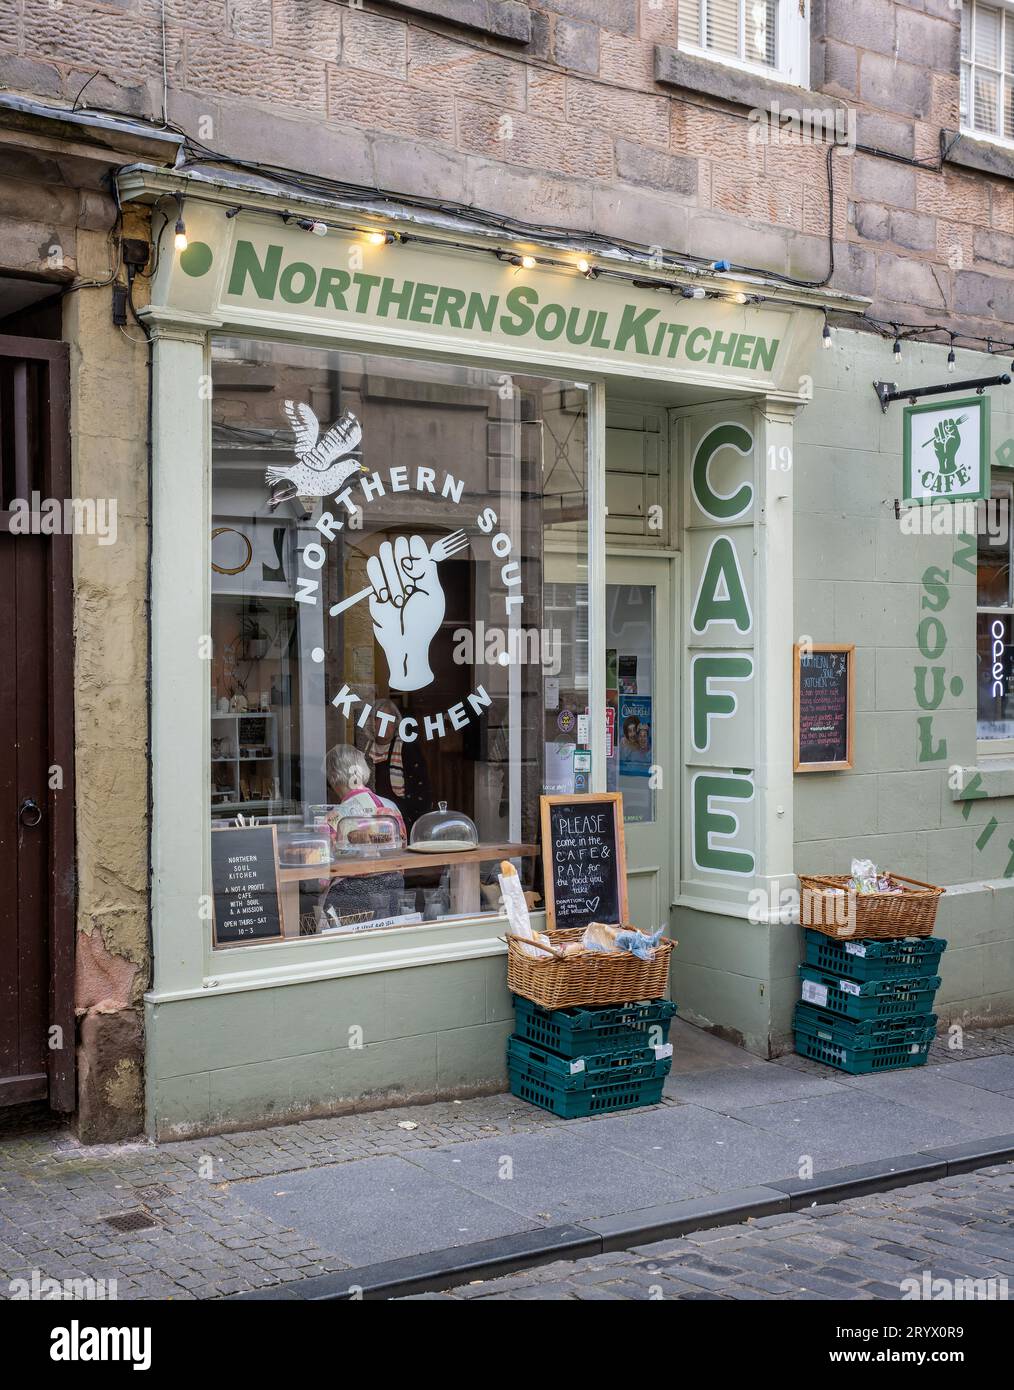 Northern Soul Cafe & Kitchen in Berwick upon Tweed, Northumberland, UK on 22 September 2023 Stock Photo